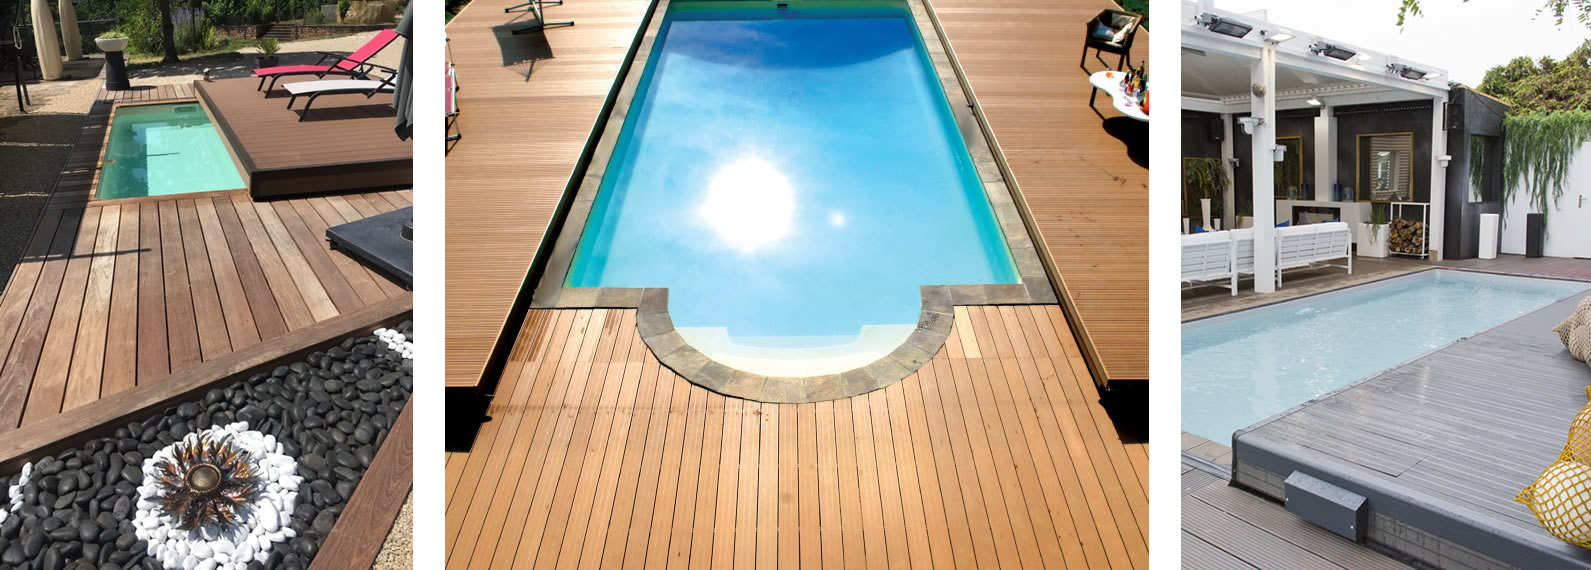 wooden deck with automatic pool cover